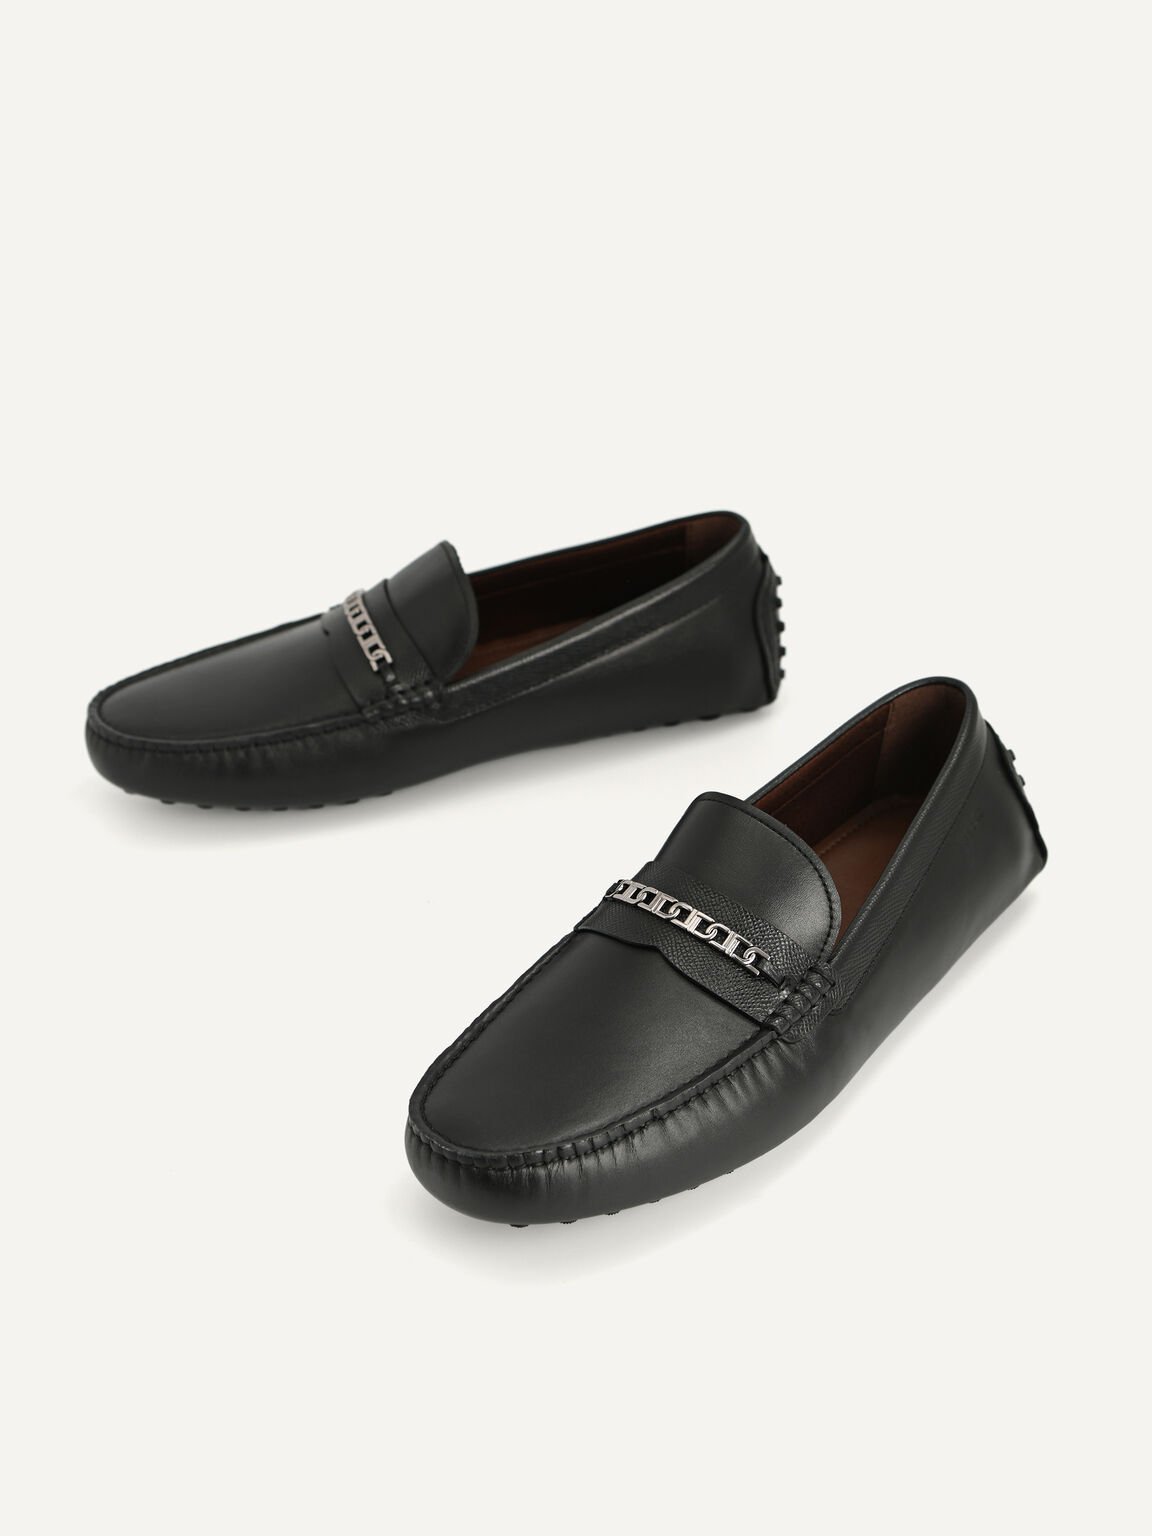 Icon leather Moccasins, Black